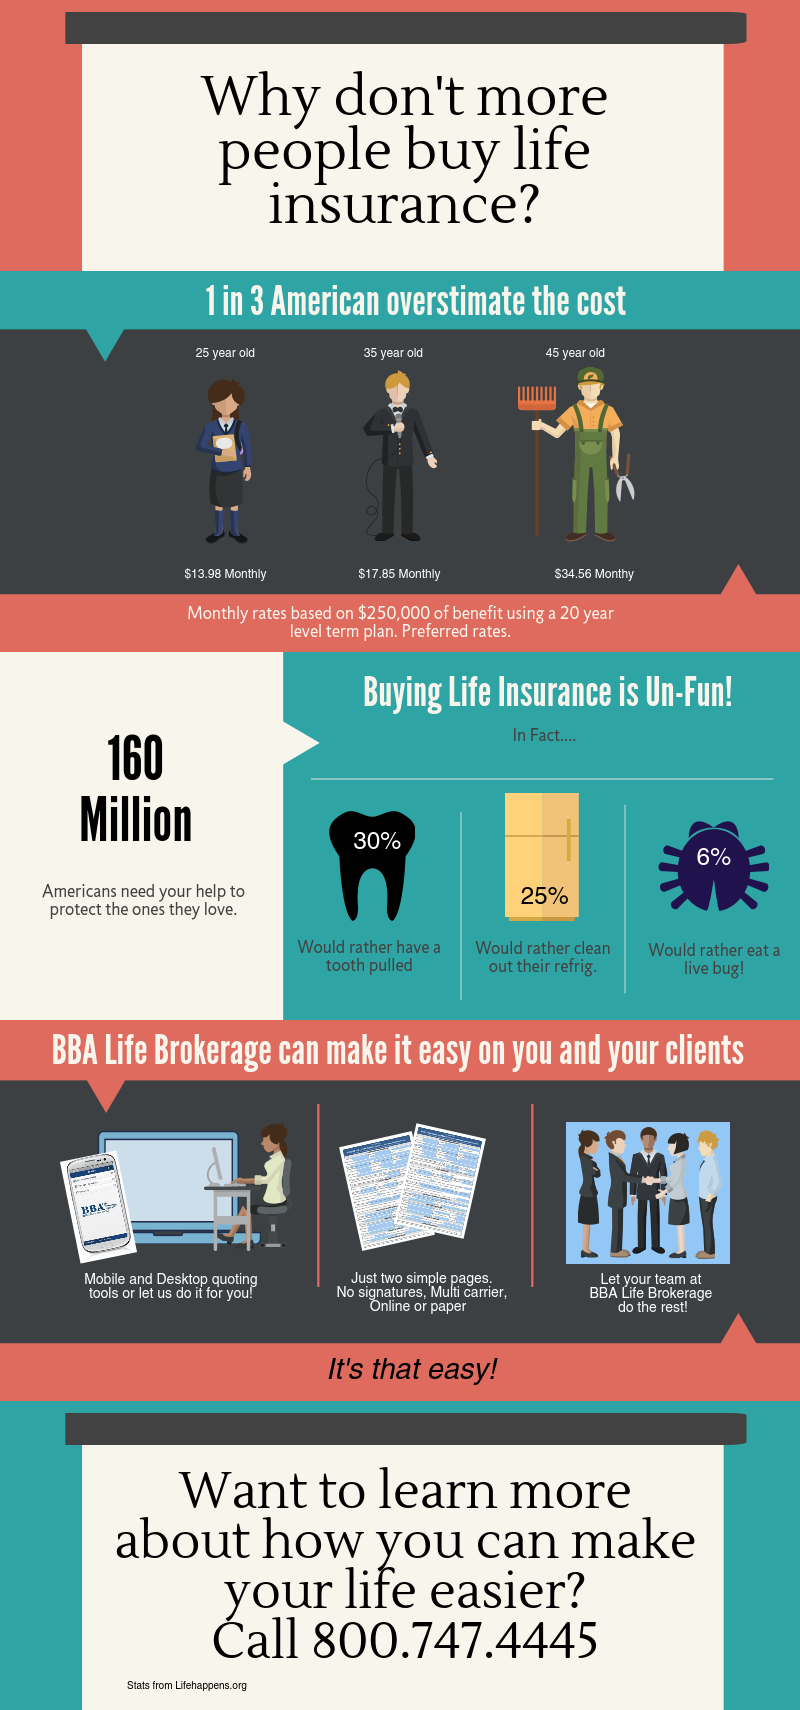 Why don't more people buy life insurance? | Piktochart Visual Editor